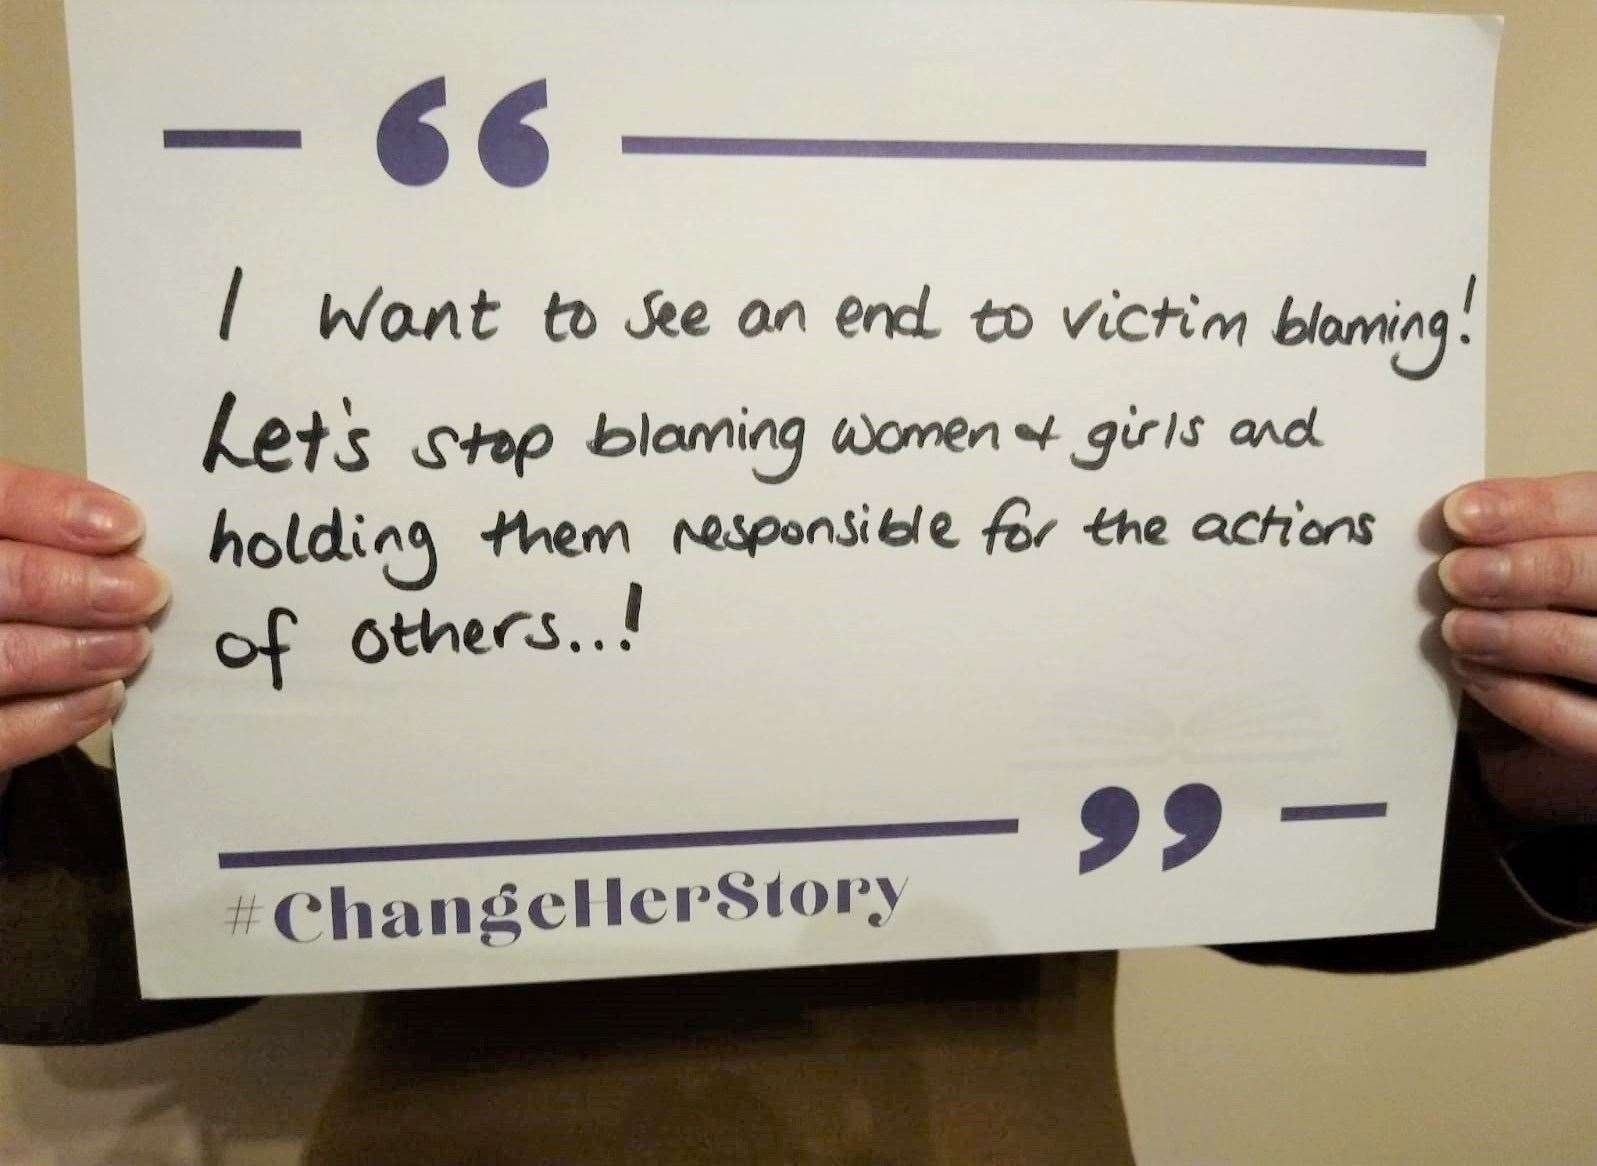 Local people joined the Change Her Story campaign in December.